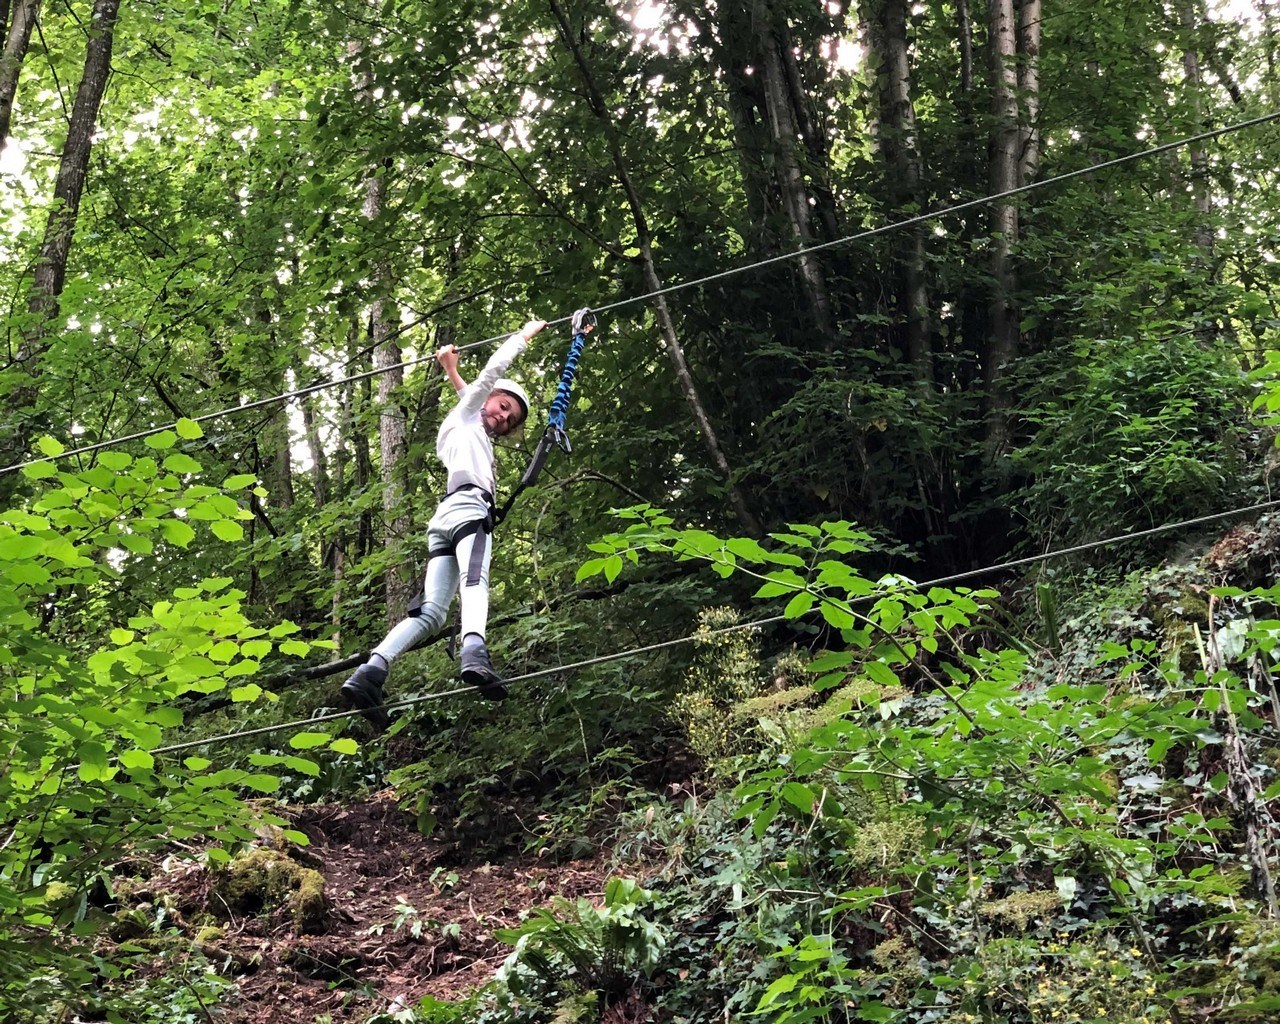 Image Via Ferrata and zip line route in the forest | TeambuildingGuide